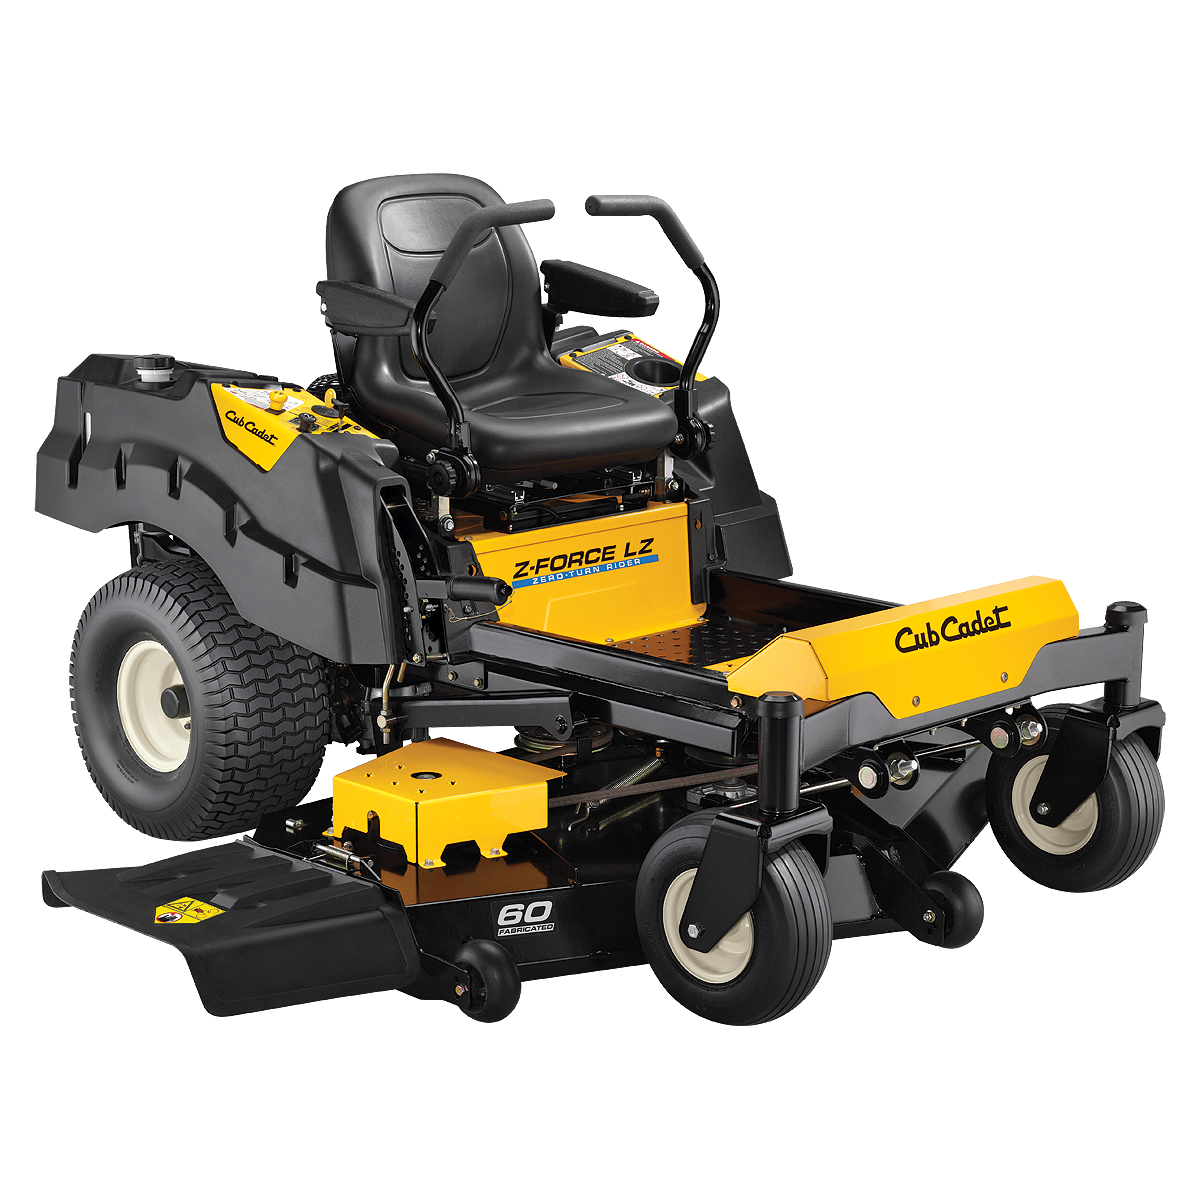 Details about New Cub Cadet Z-Force LZ60 Zero Turn Mower 60